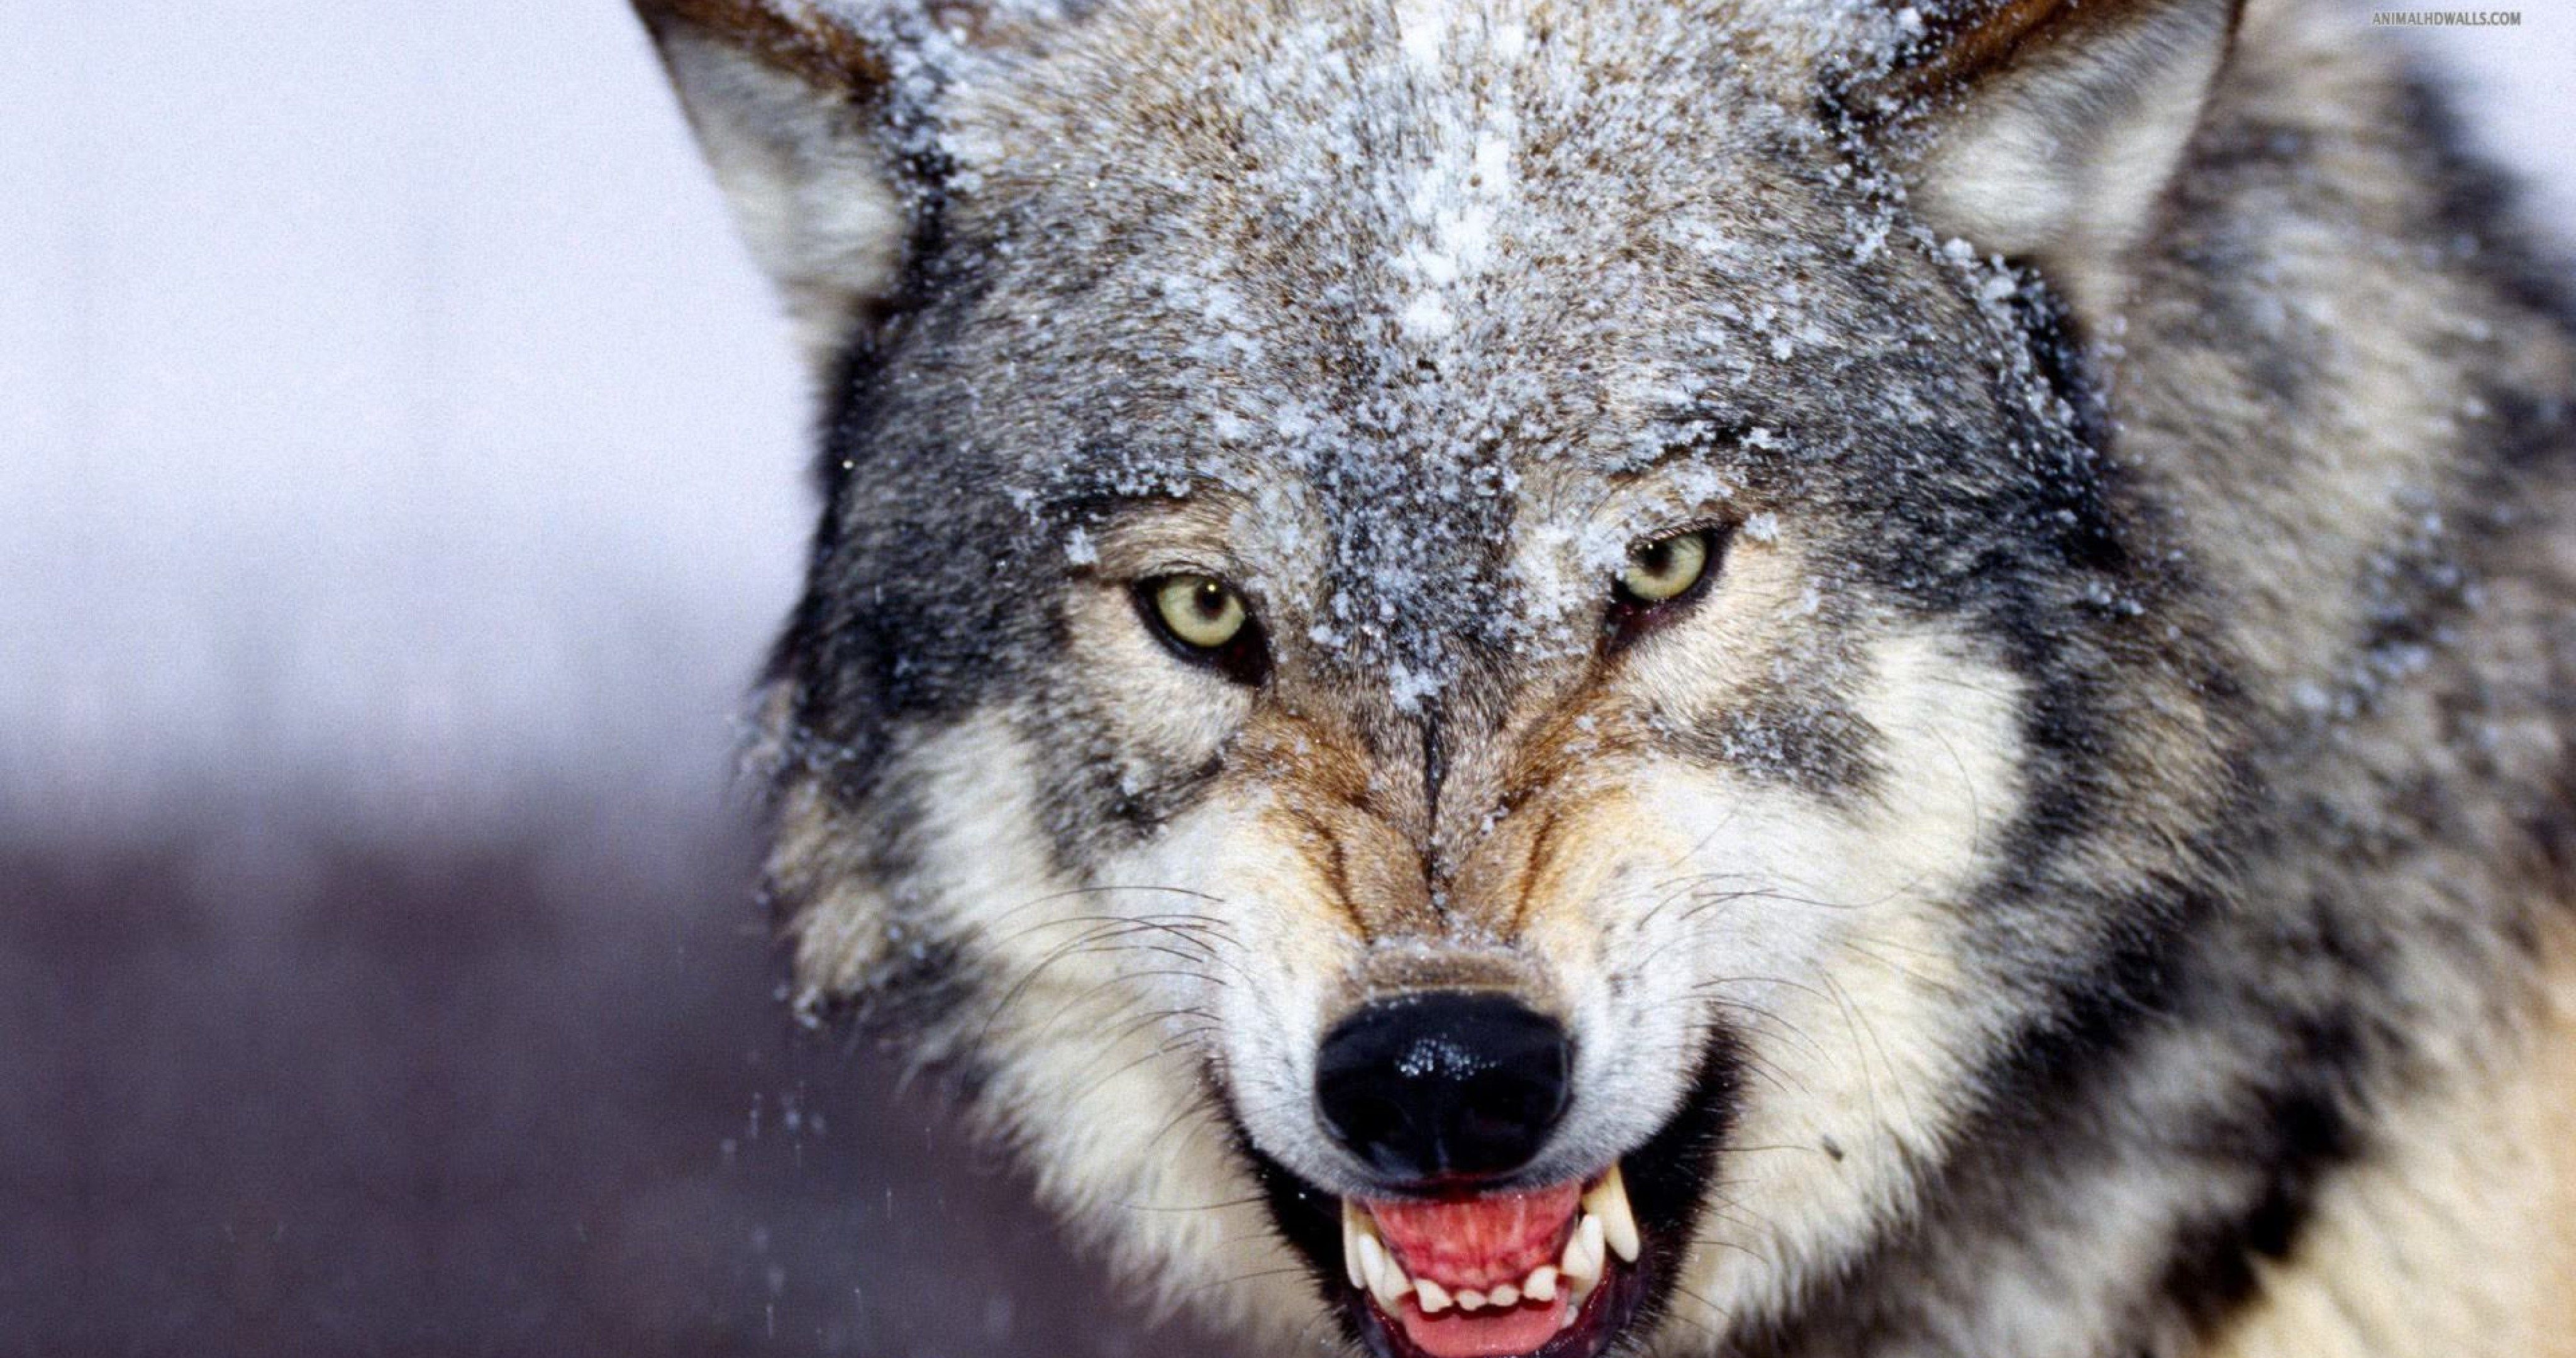 Angry Wolf Wallpapers Hd - Wallpaper Cave